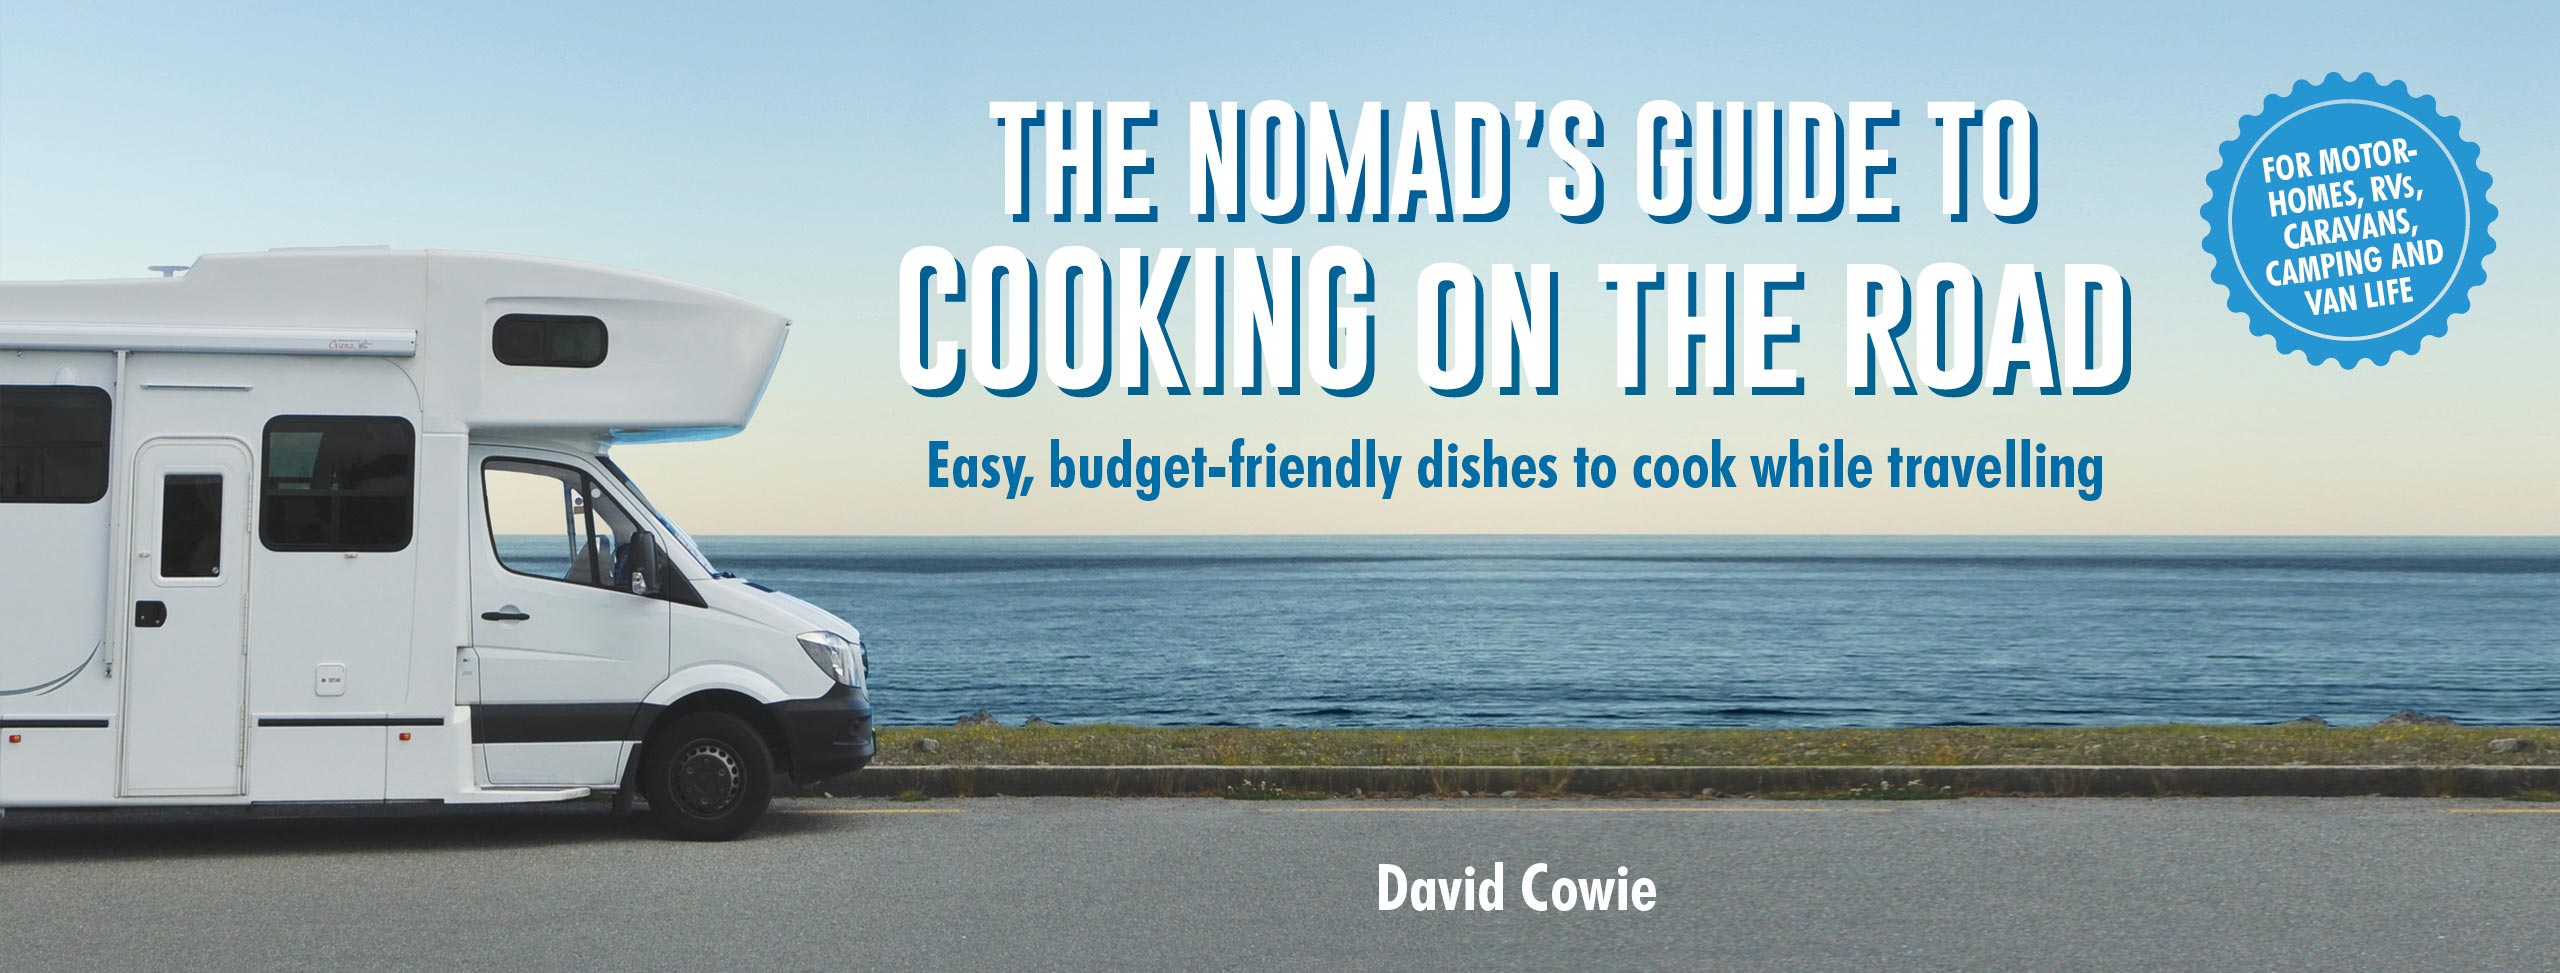 Nomads Guide to Cooking on the Road